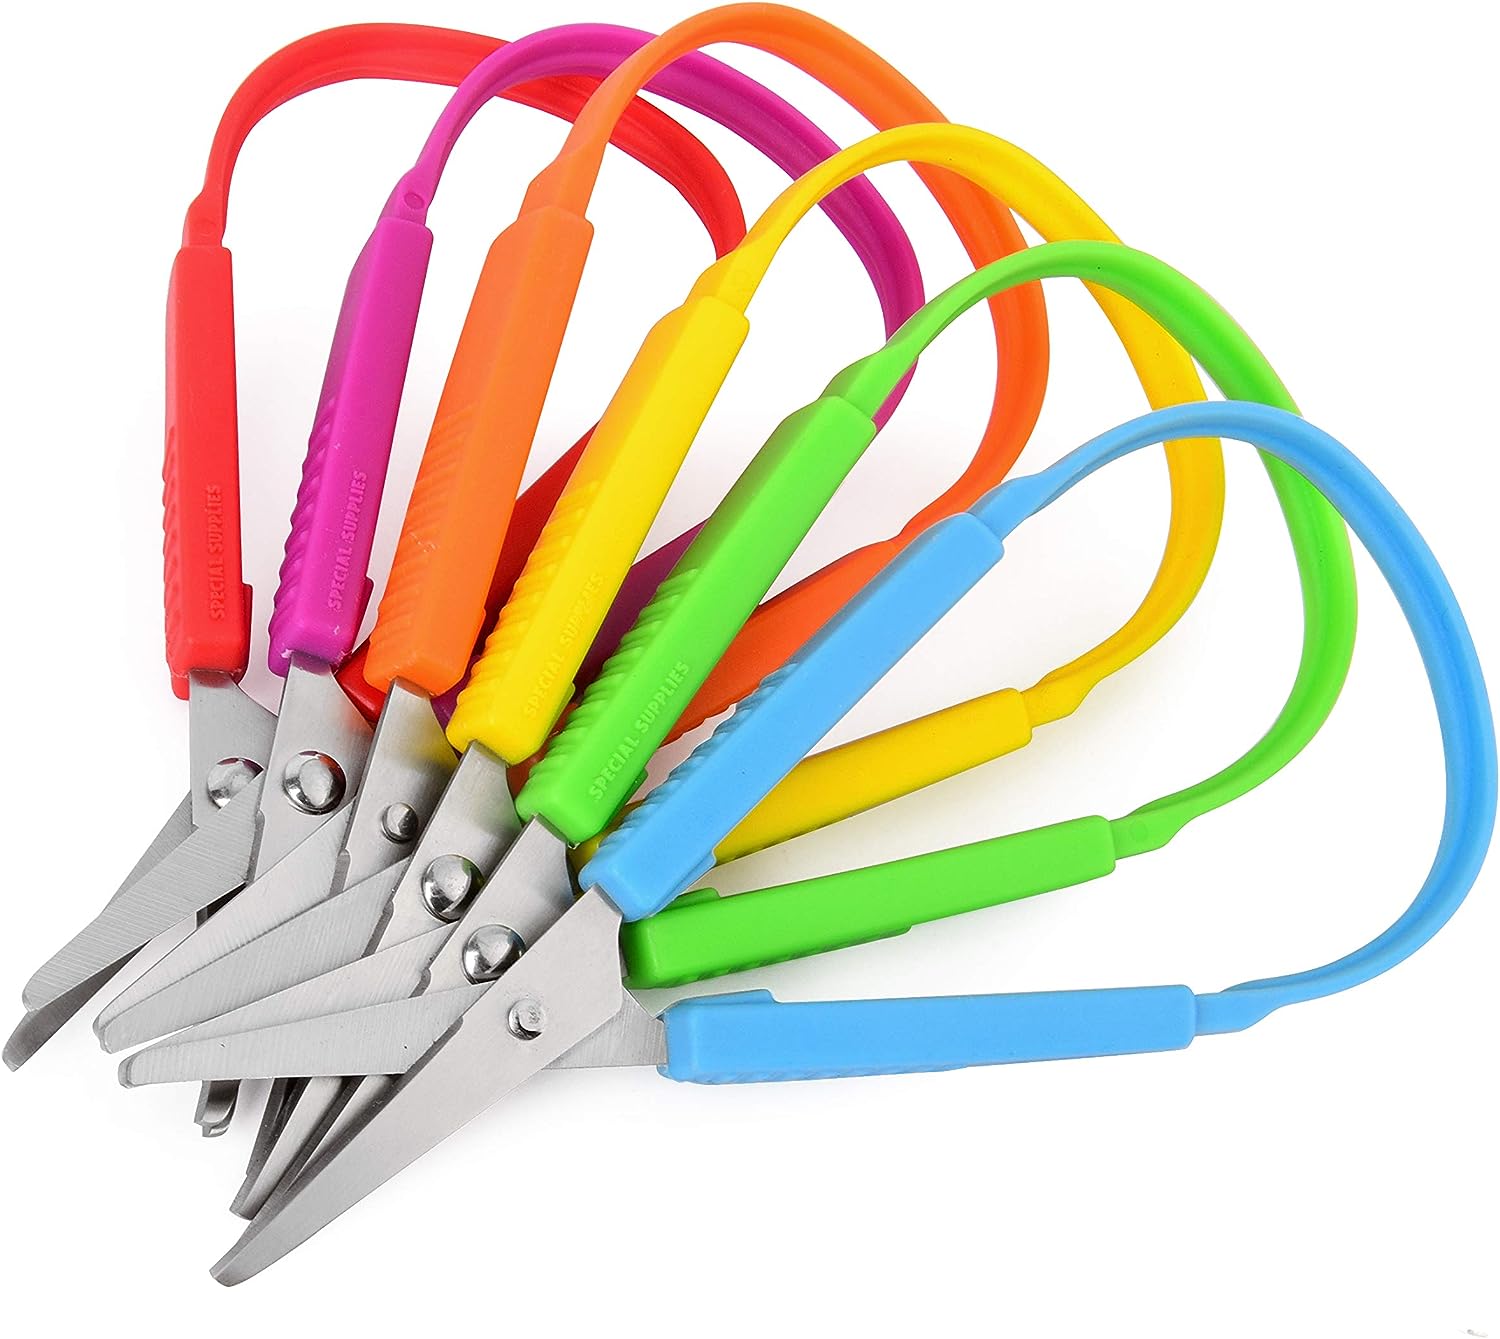 Special Supplies Mini Loop Scissors for Children and Teens and 5.5 Inches  (6-Pack) Colorful Looped, Adaptive Design, Right and Lefty Support, Small,  Easy-Open Squeeze Handles, For Special Needs 